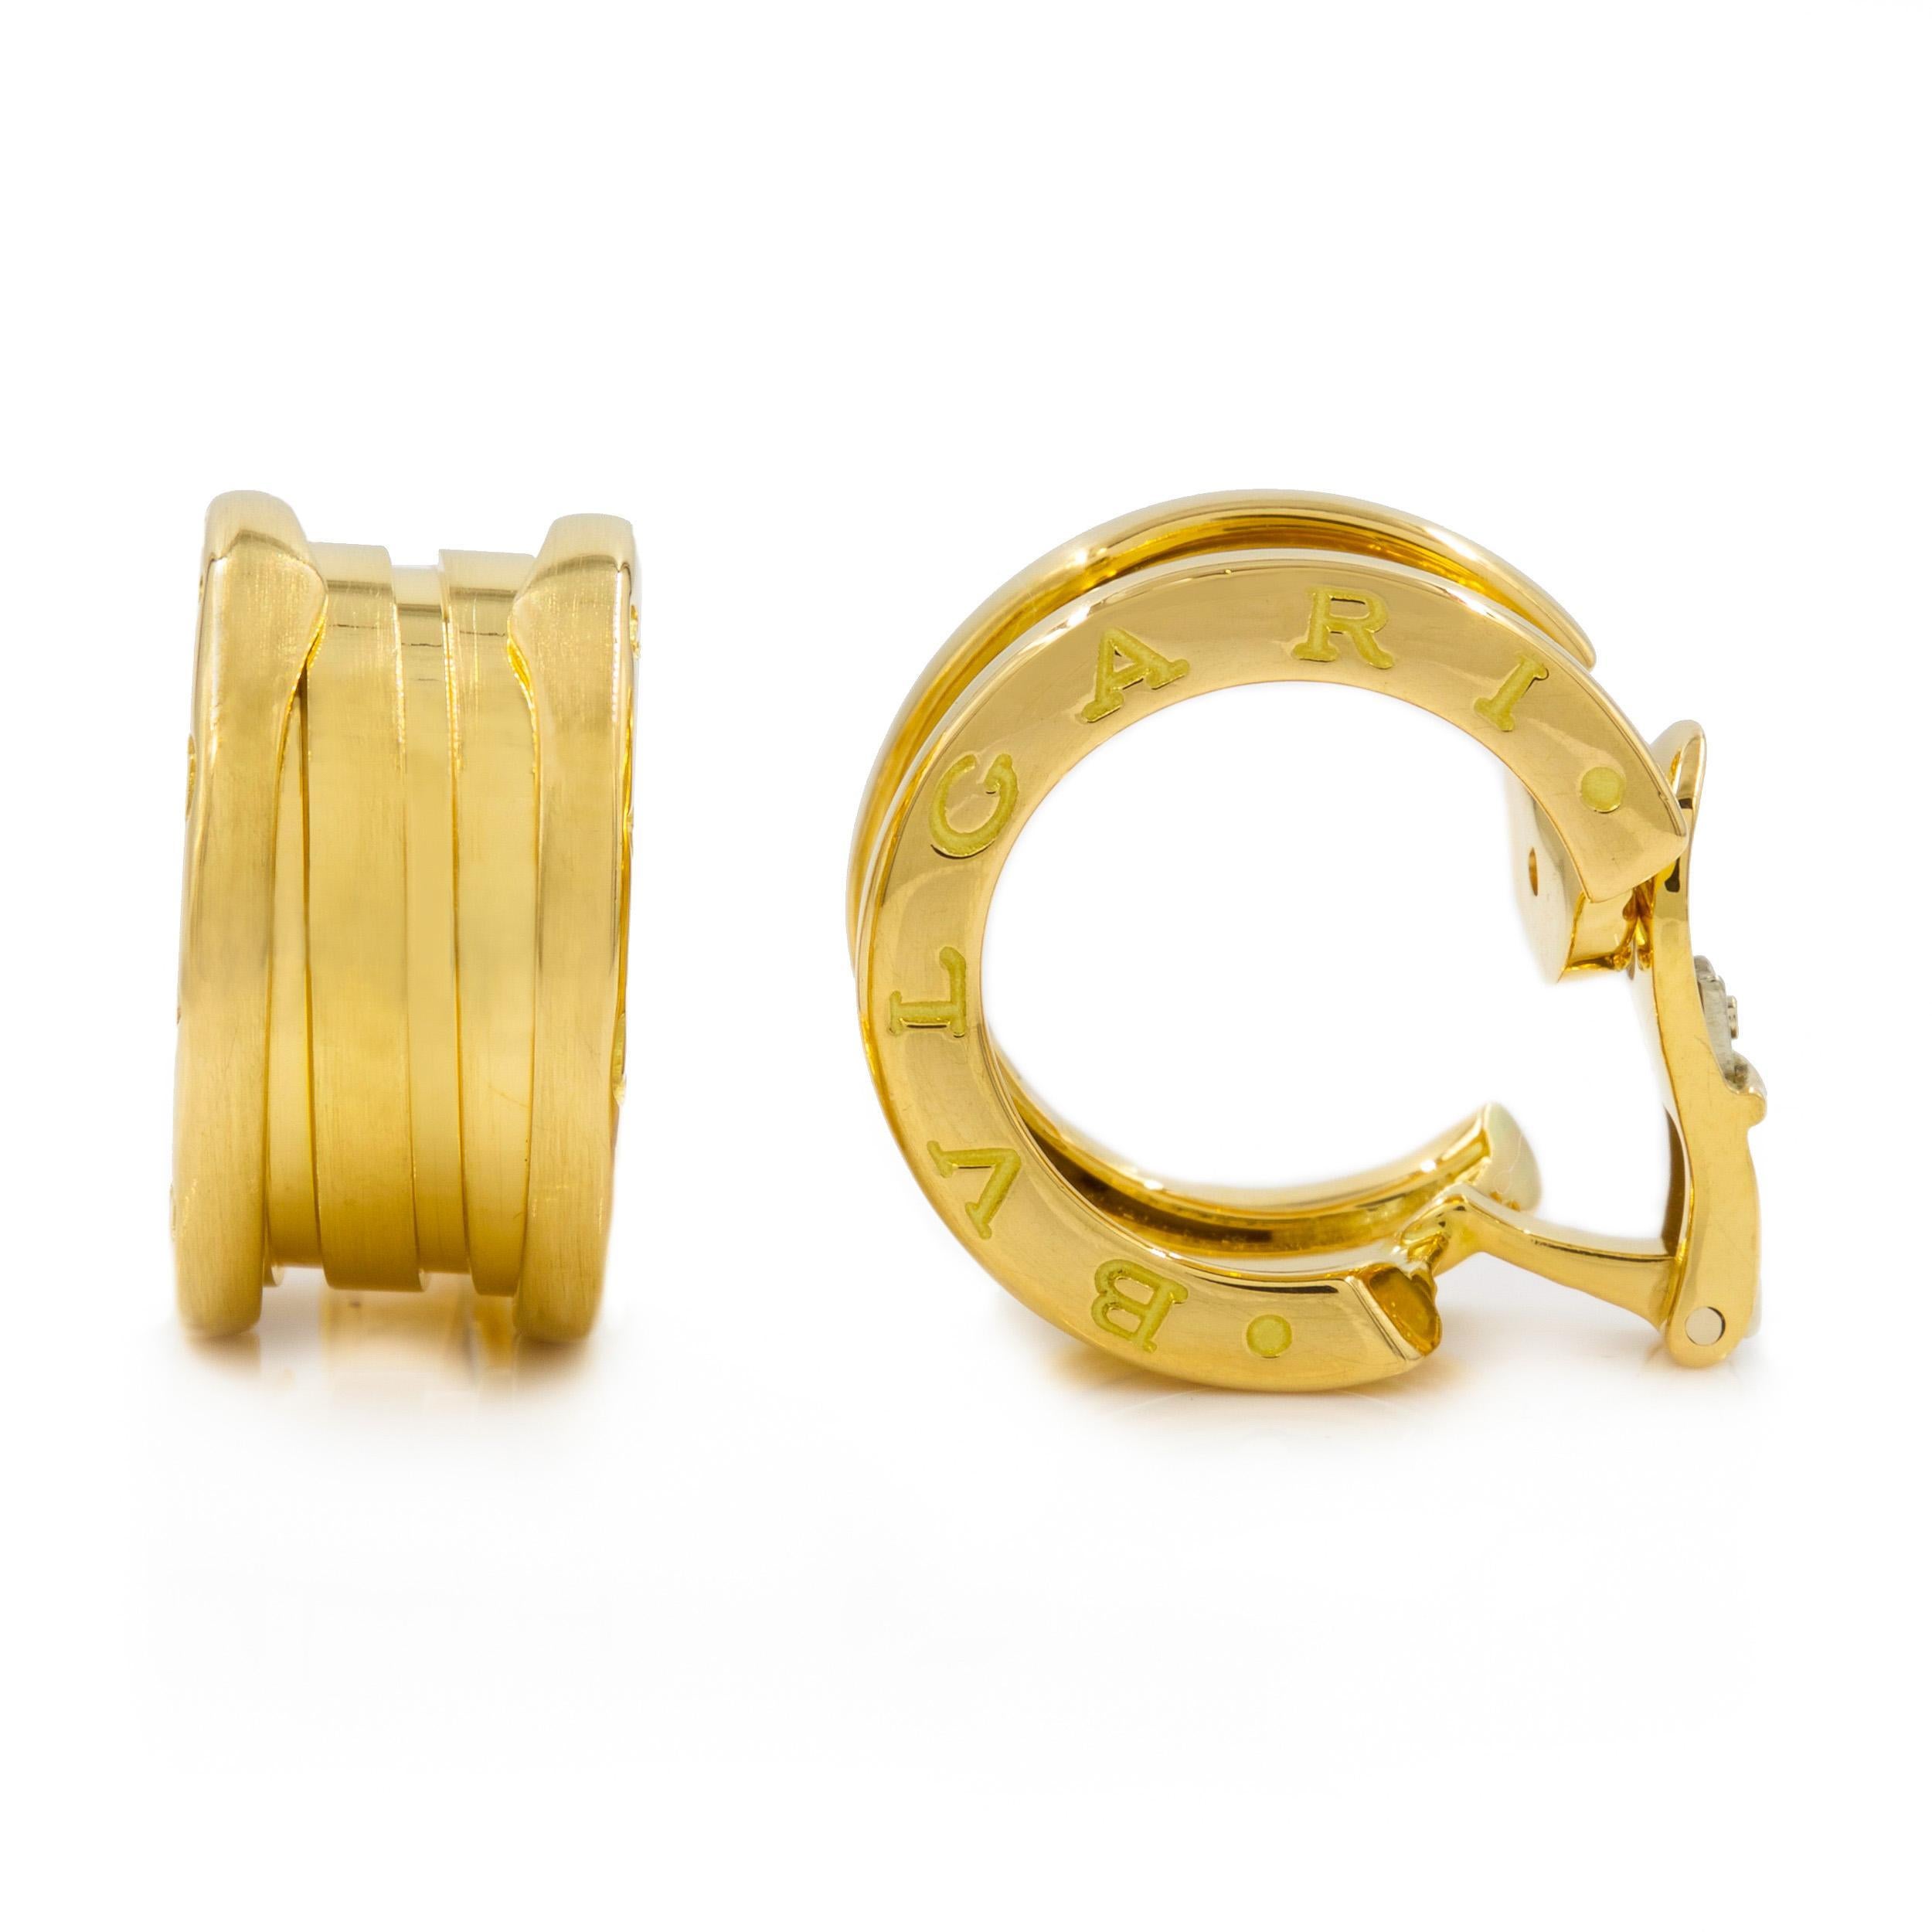 An iconic and classic form by Bvlgari, these B.Zero1 gold hoop earrings are positively gorgeous with a raised ridge interior hoop flanked by folded raised rims on either side engraved 